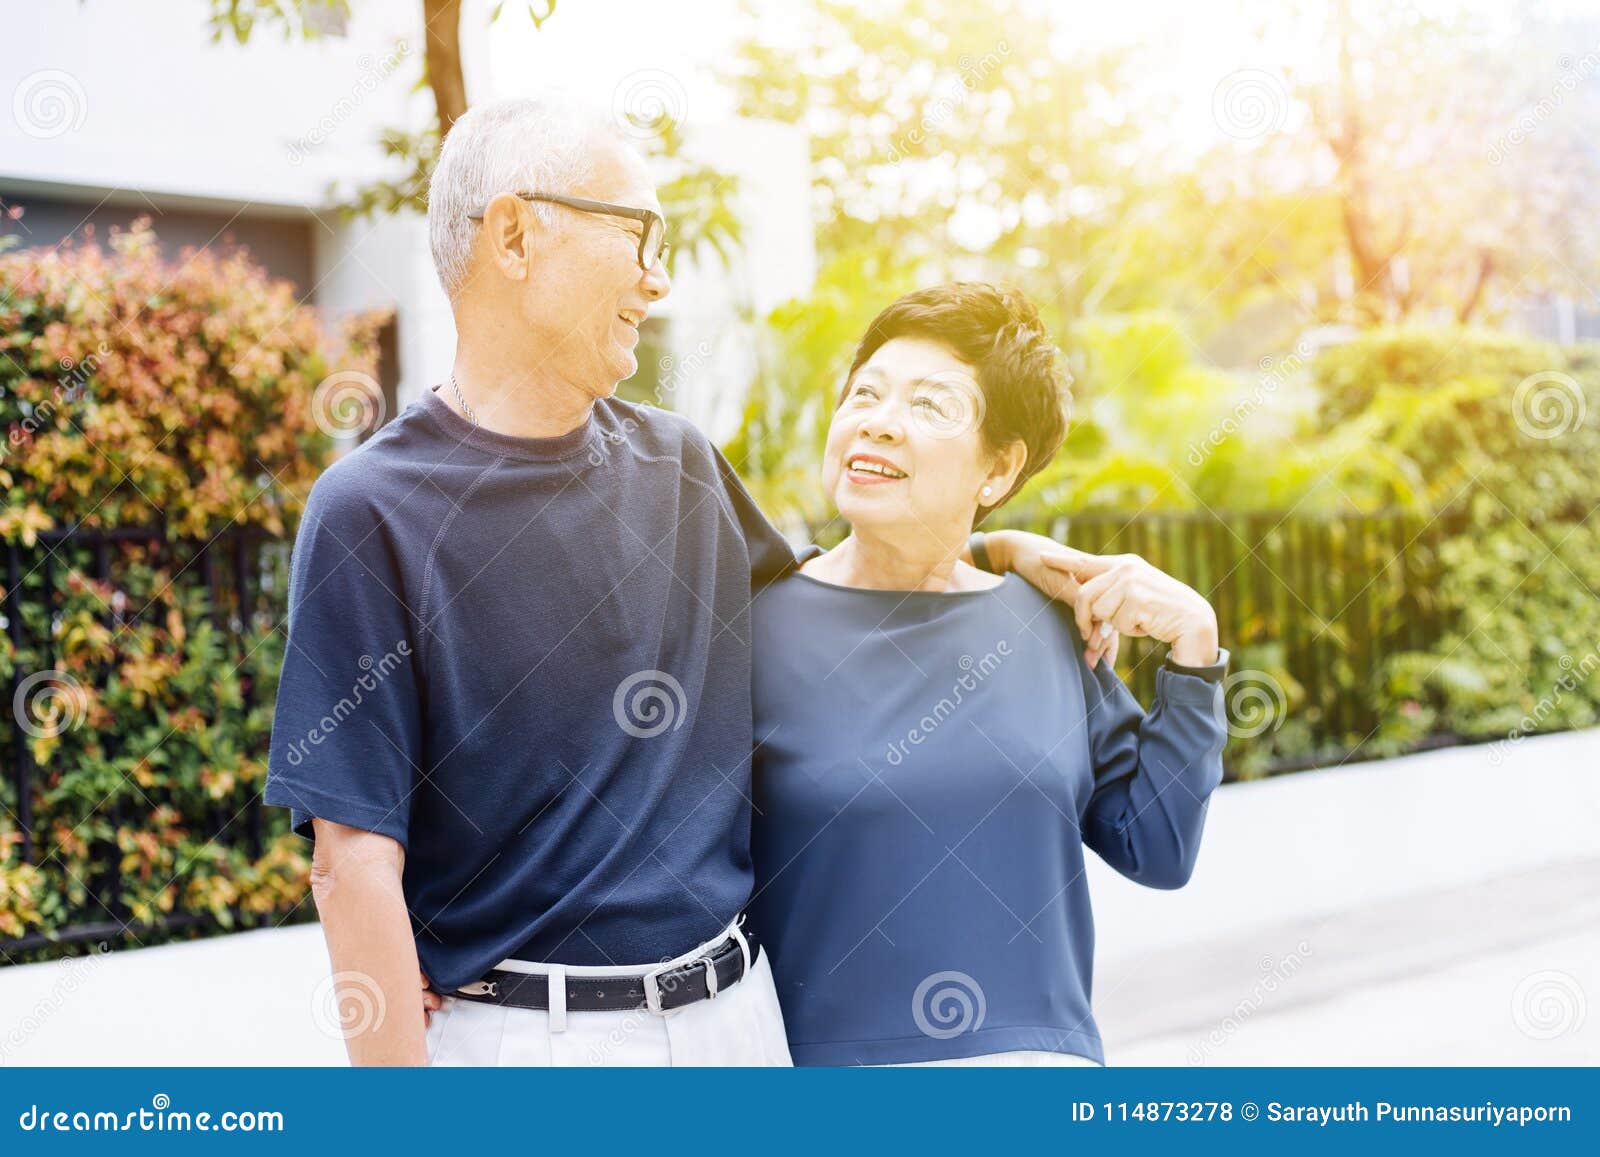 happy retired senior asian couple walking and looking at each other with romance in outdoor park and house in background.